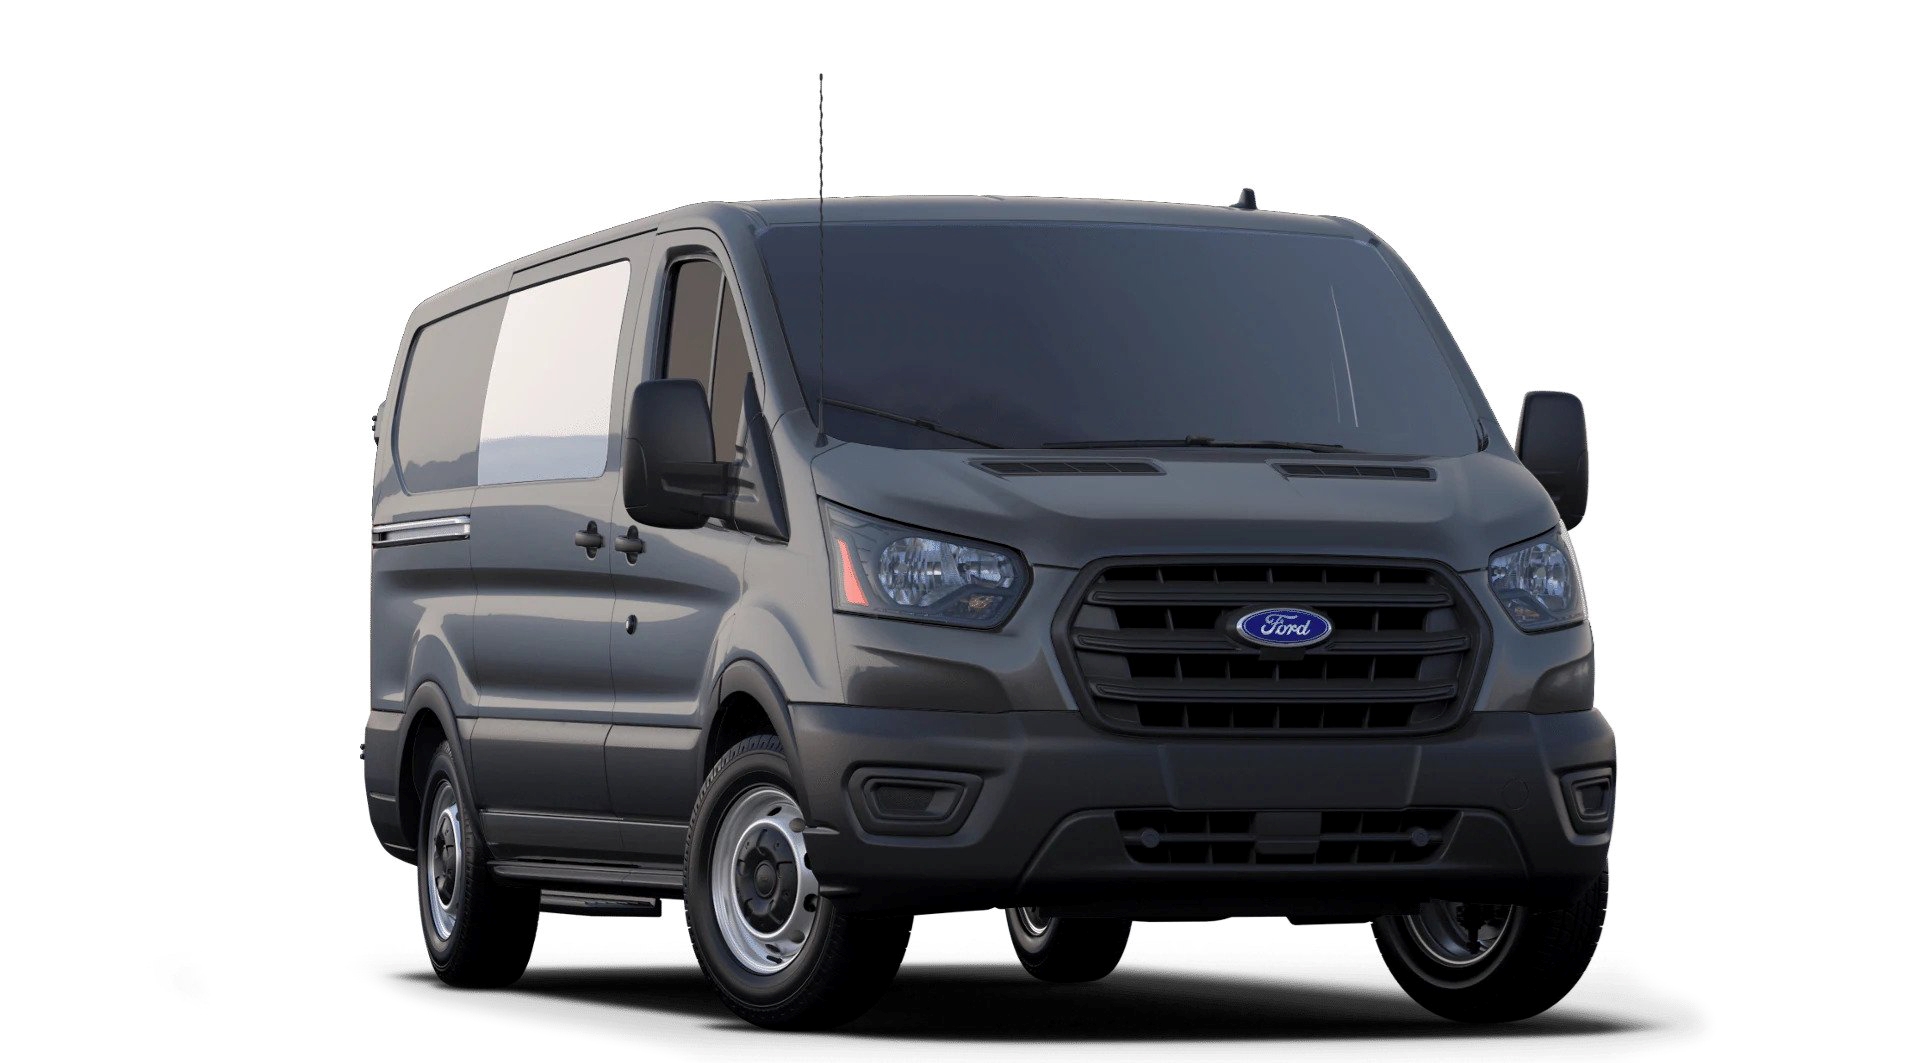 2021 Ford Transit Crew Van 350 Full Specs, Features and Price | CarBuzz